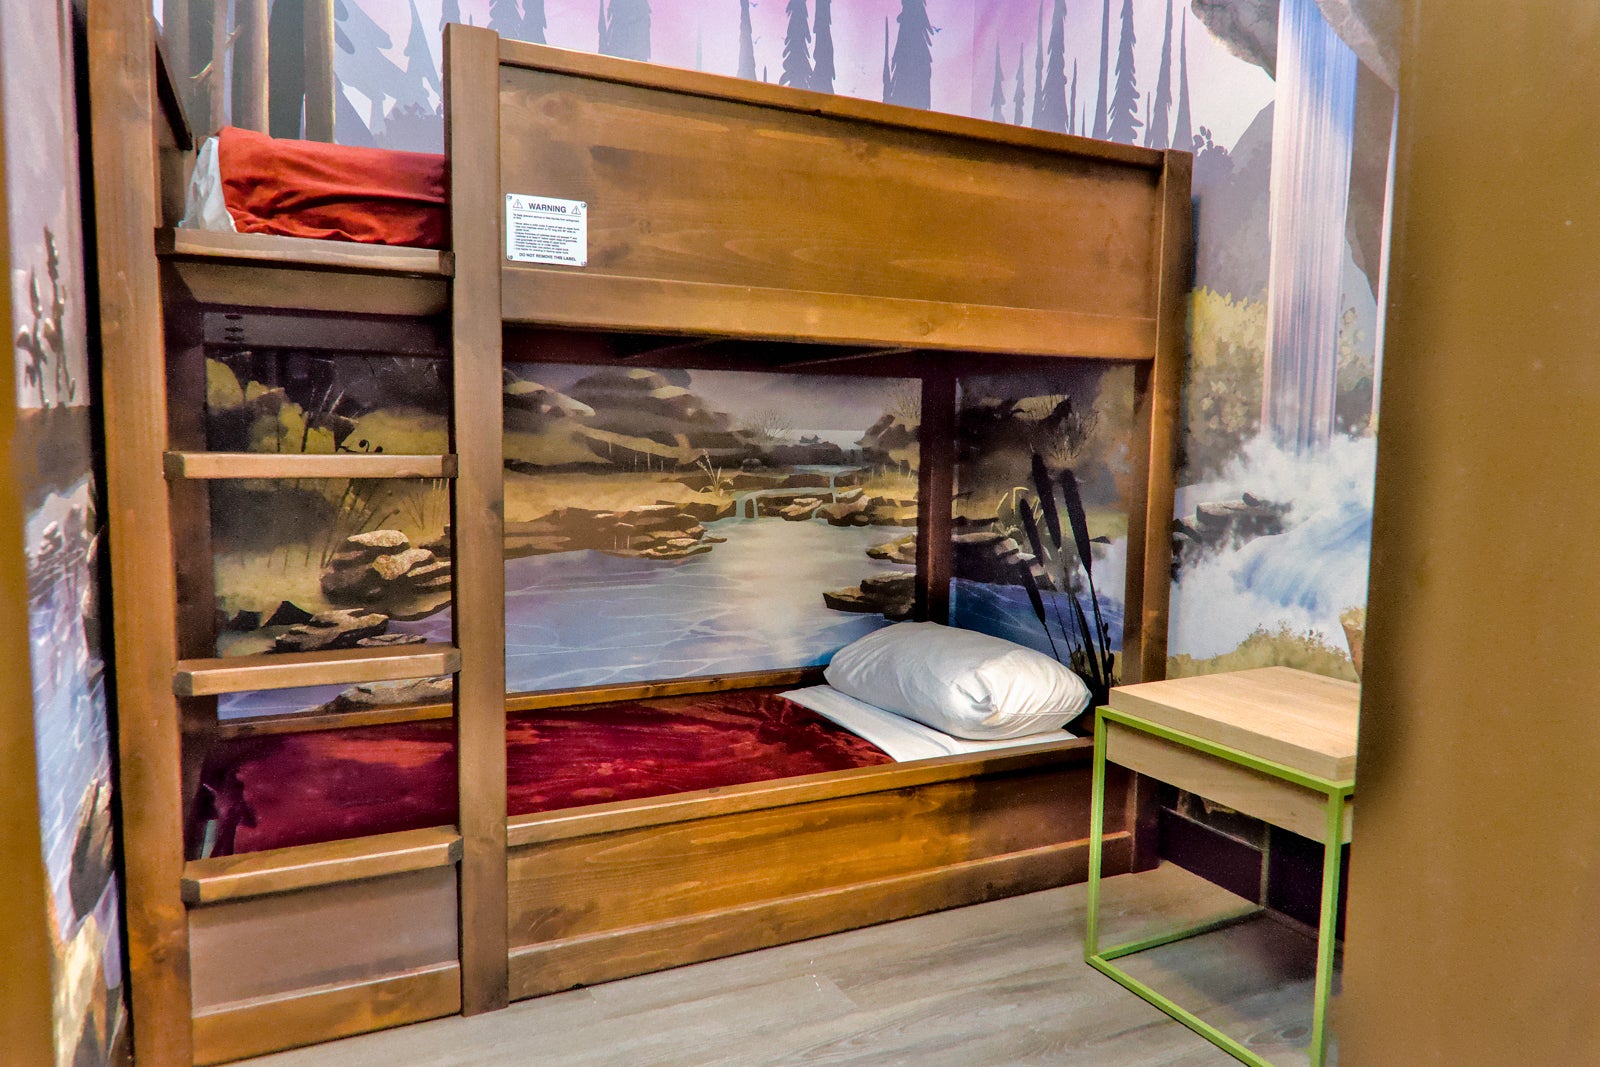 Kids' bunkbeds at Great Wolf Lodge Maryland